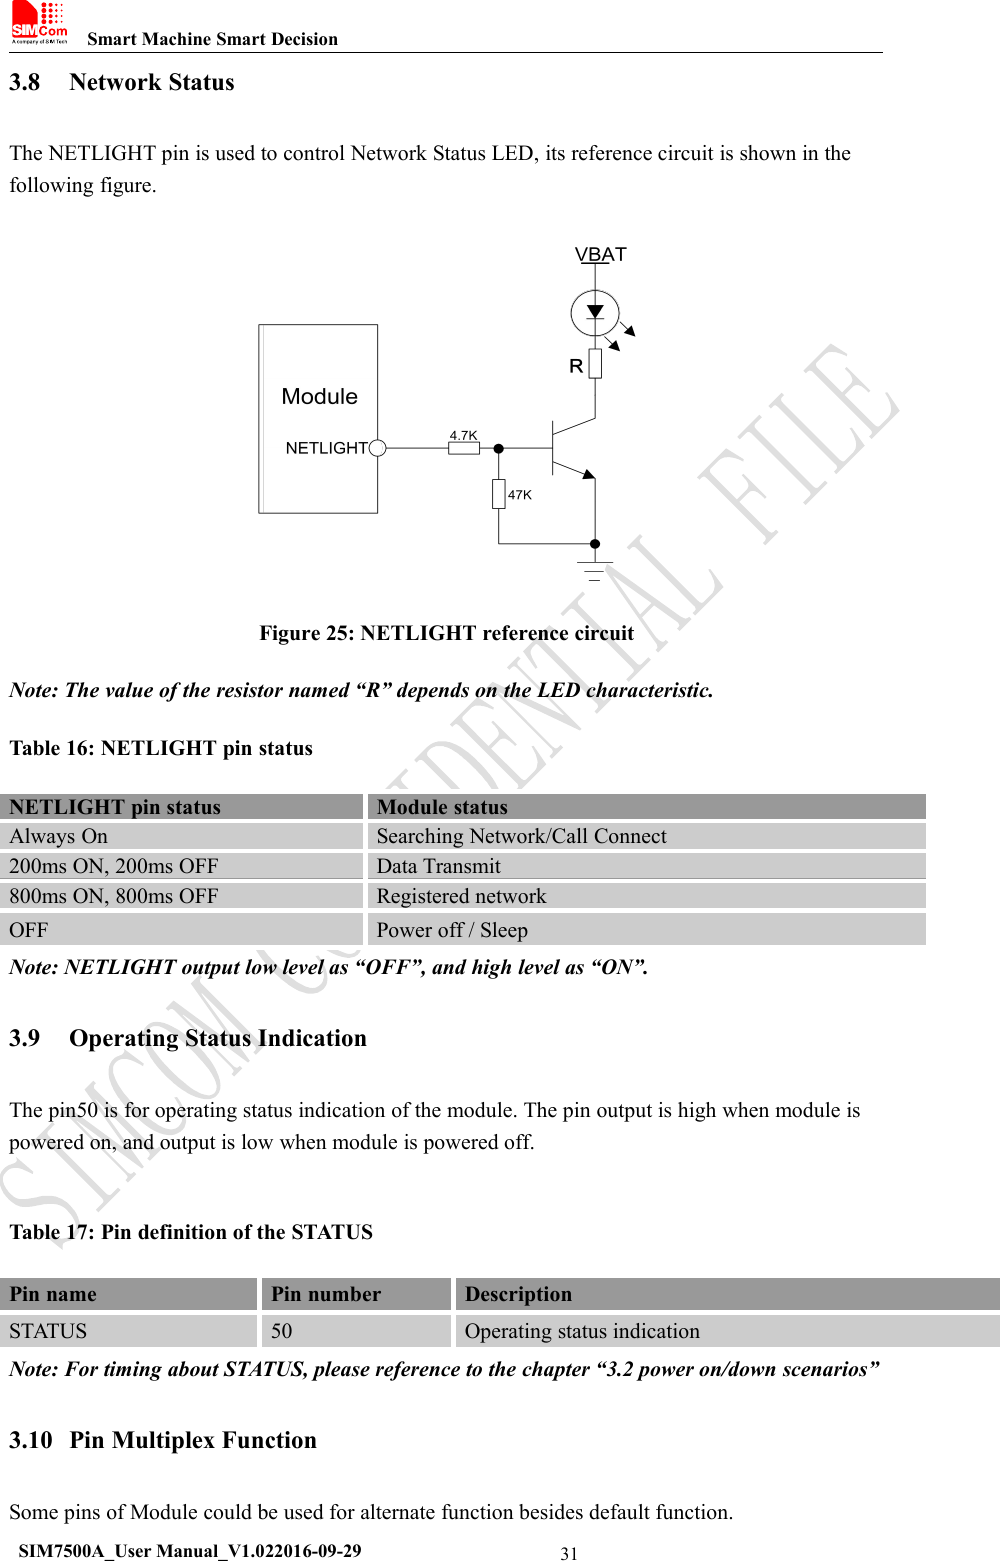 Smart Machine Smart DecisionSIM7500A_User Manual_V1.022016-09-29313.8 Network StatusThe NETLIGHT pin is used to control Network Status LED, its reference circuit is shown in thefollowing figure.Figure 25: NETLIGHT reference circuitNote: The value of the resistor named “R” depends on the LED characteristic.Table 16: NETLIGHT pin statusNETLIGHT pin statusModule statusAlways OnSearching Network/Call Connect200ms ON, 200ms OFFData Transmit800ms ON, 800ms OFFRegistered networkOFFPower off / SleepNote: NETLIGHT output low level as “OFF”, and high level as “ON”.3.9 Operating Status IndicationThe pin50 is for operating status indication of the module. The pin output is high when module ispowered on, and output is low when module is powered off.Table 17: Pin definition of the STATUSPin namePin numberDescriptionSTATUS50Operating status indicationNote: For timing about STATUS, please reference to the chapter “3.2 power on/down scenarios”3.10 Pin Multiplex FunctionSome pins of Module could be used for alternate function besides default function.